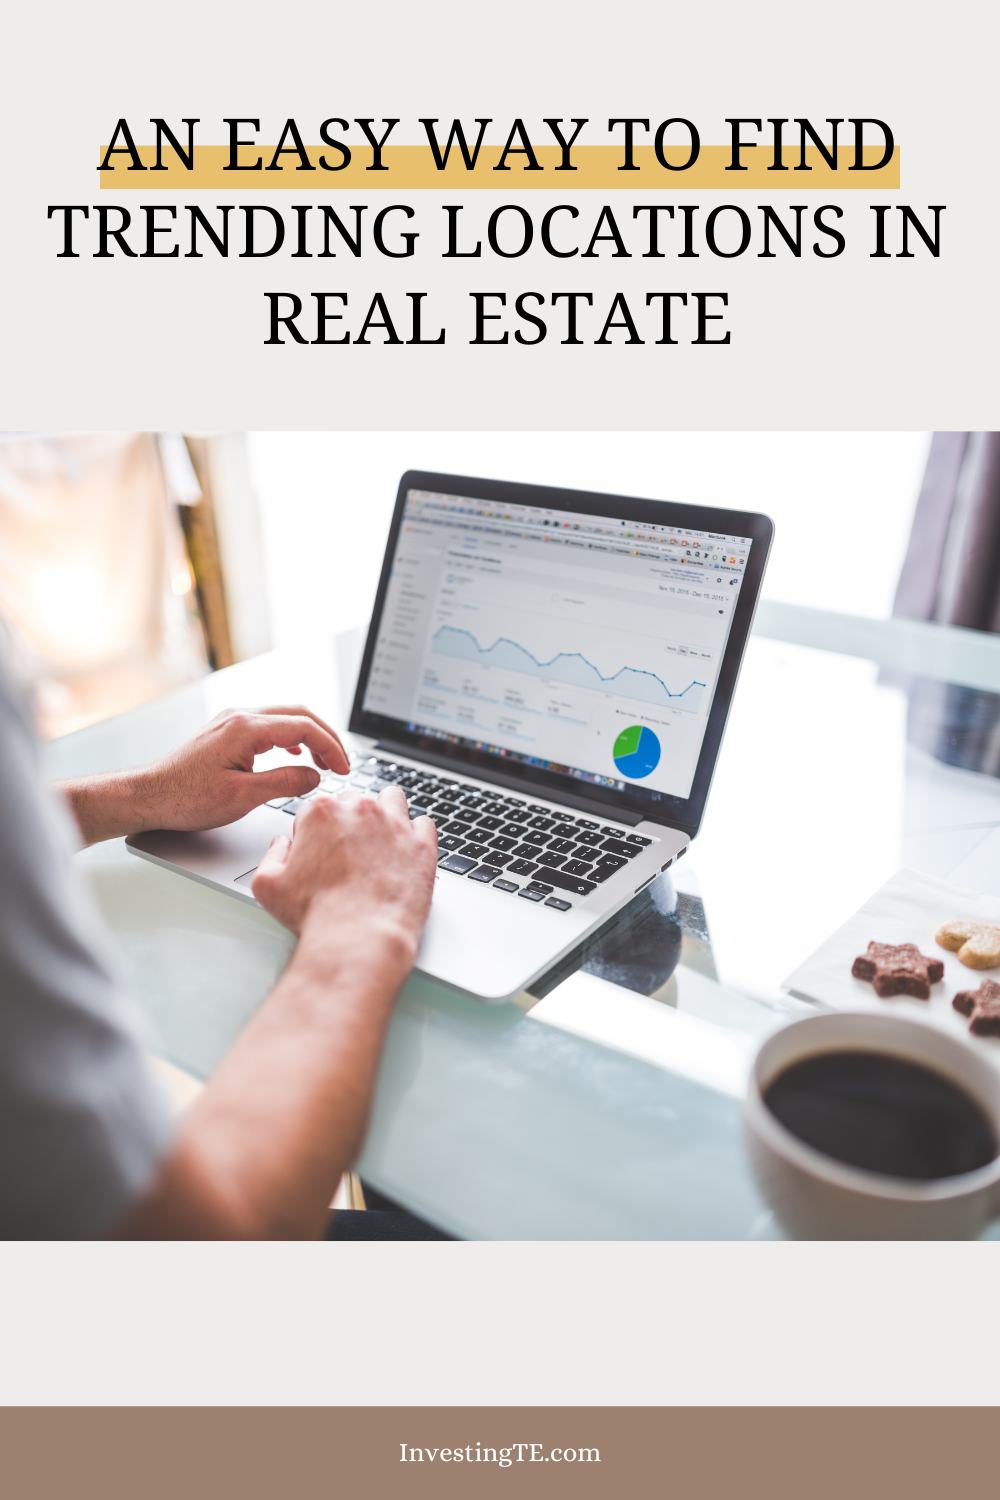 An Easy Way to Find Trending Locations in Real Estate | Blog | InvestingTE.com